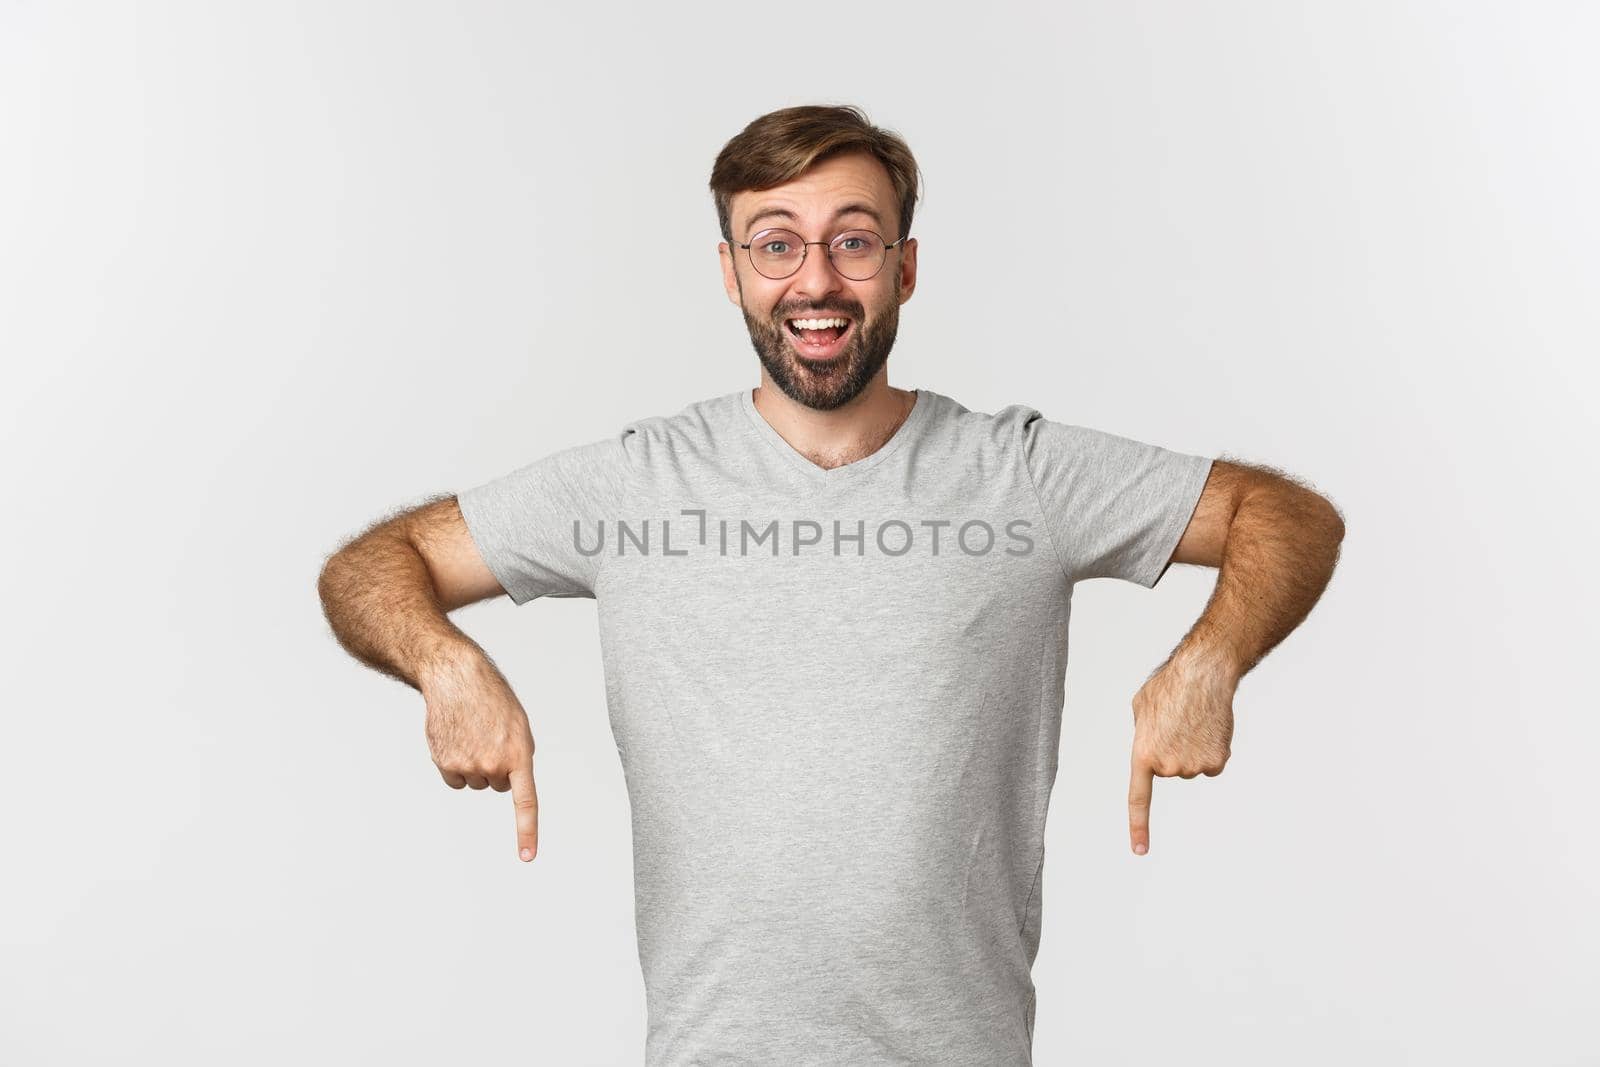 Cheerful bearded man smiling, pointing fingers down, showing logo, wearing gray t-shirt, wearing gray t-shirt, standing over white background.